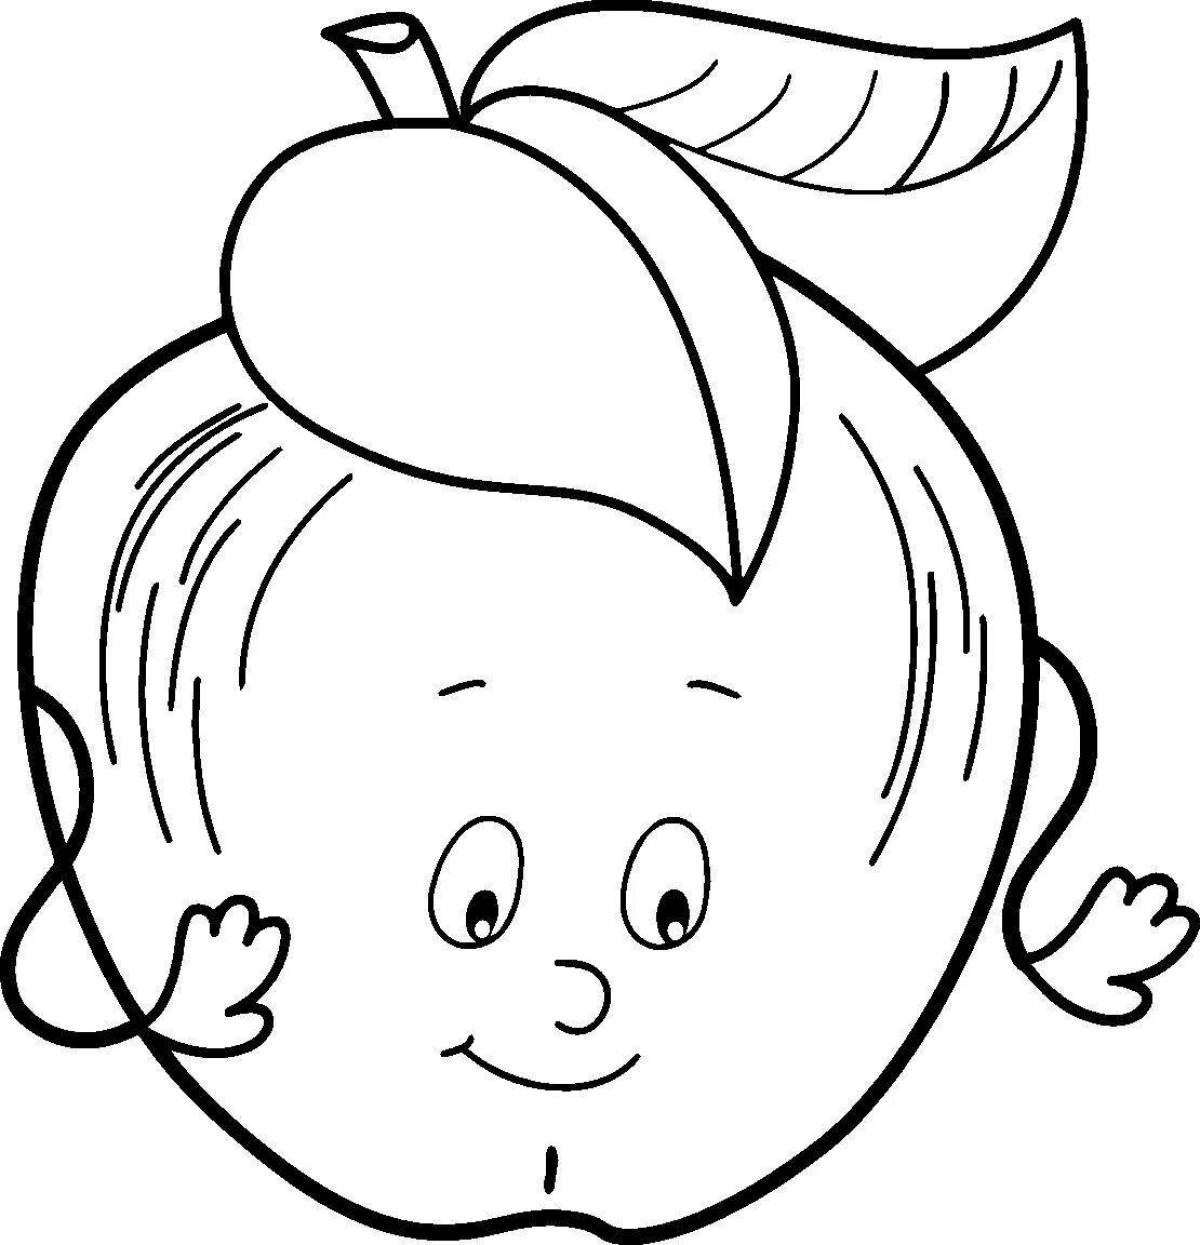 Coloring book for girls fruits and vegetables